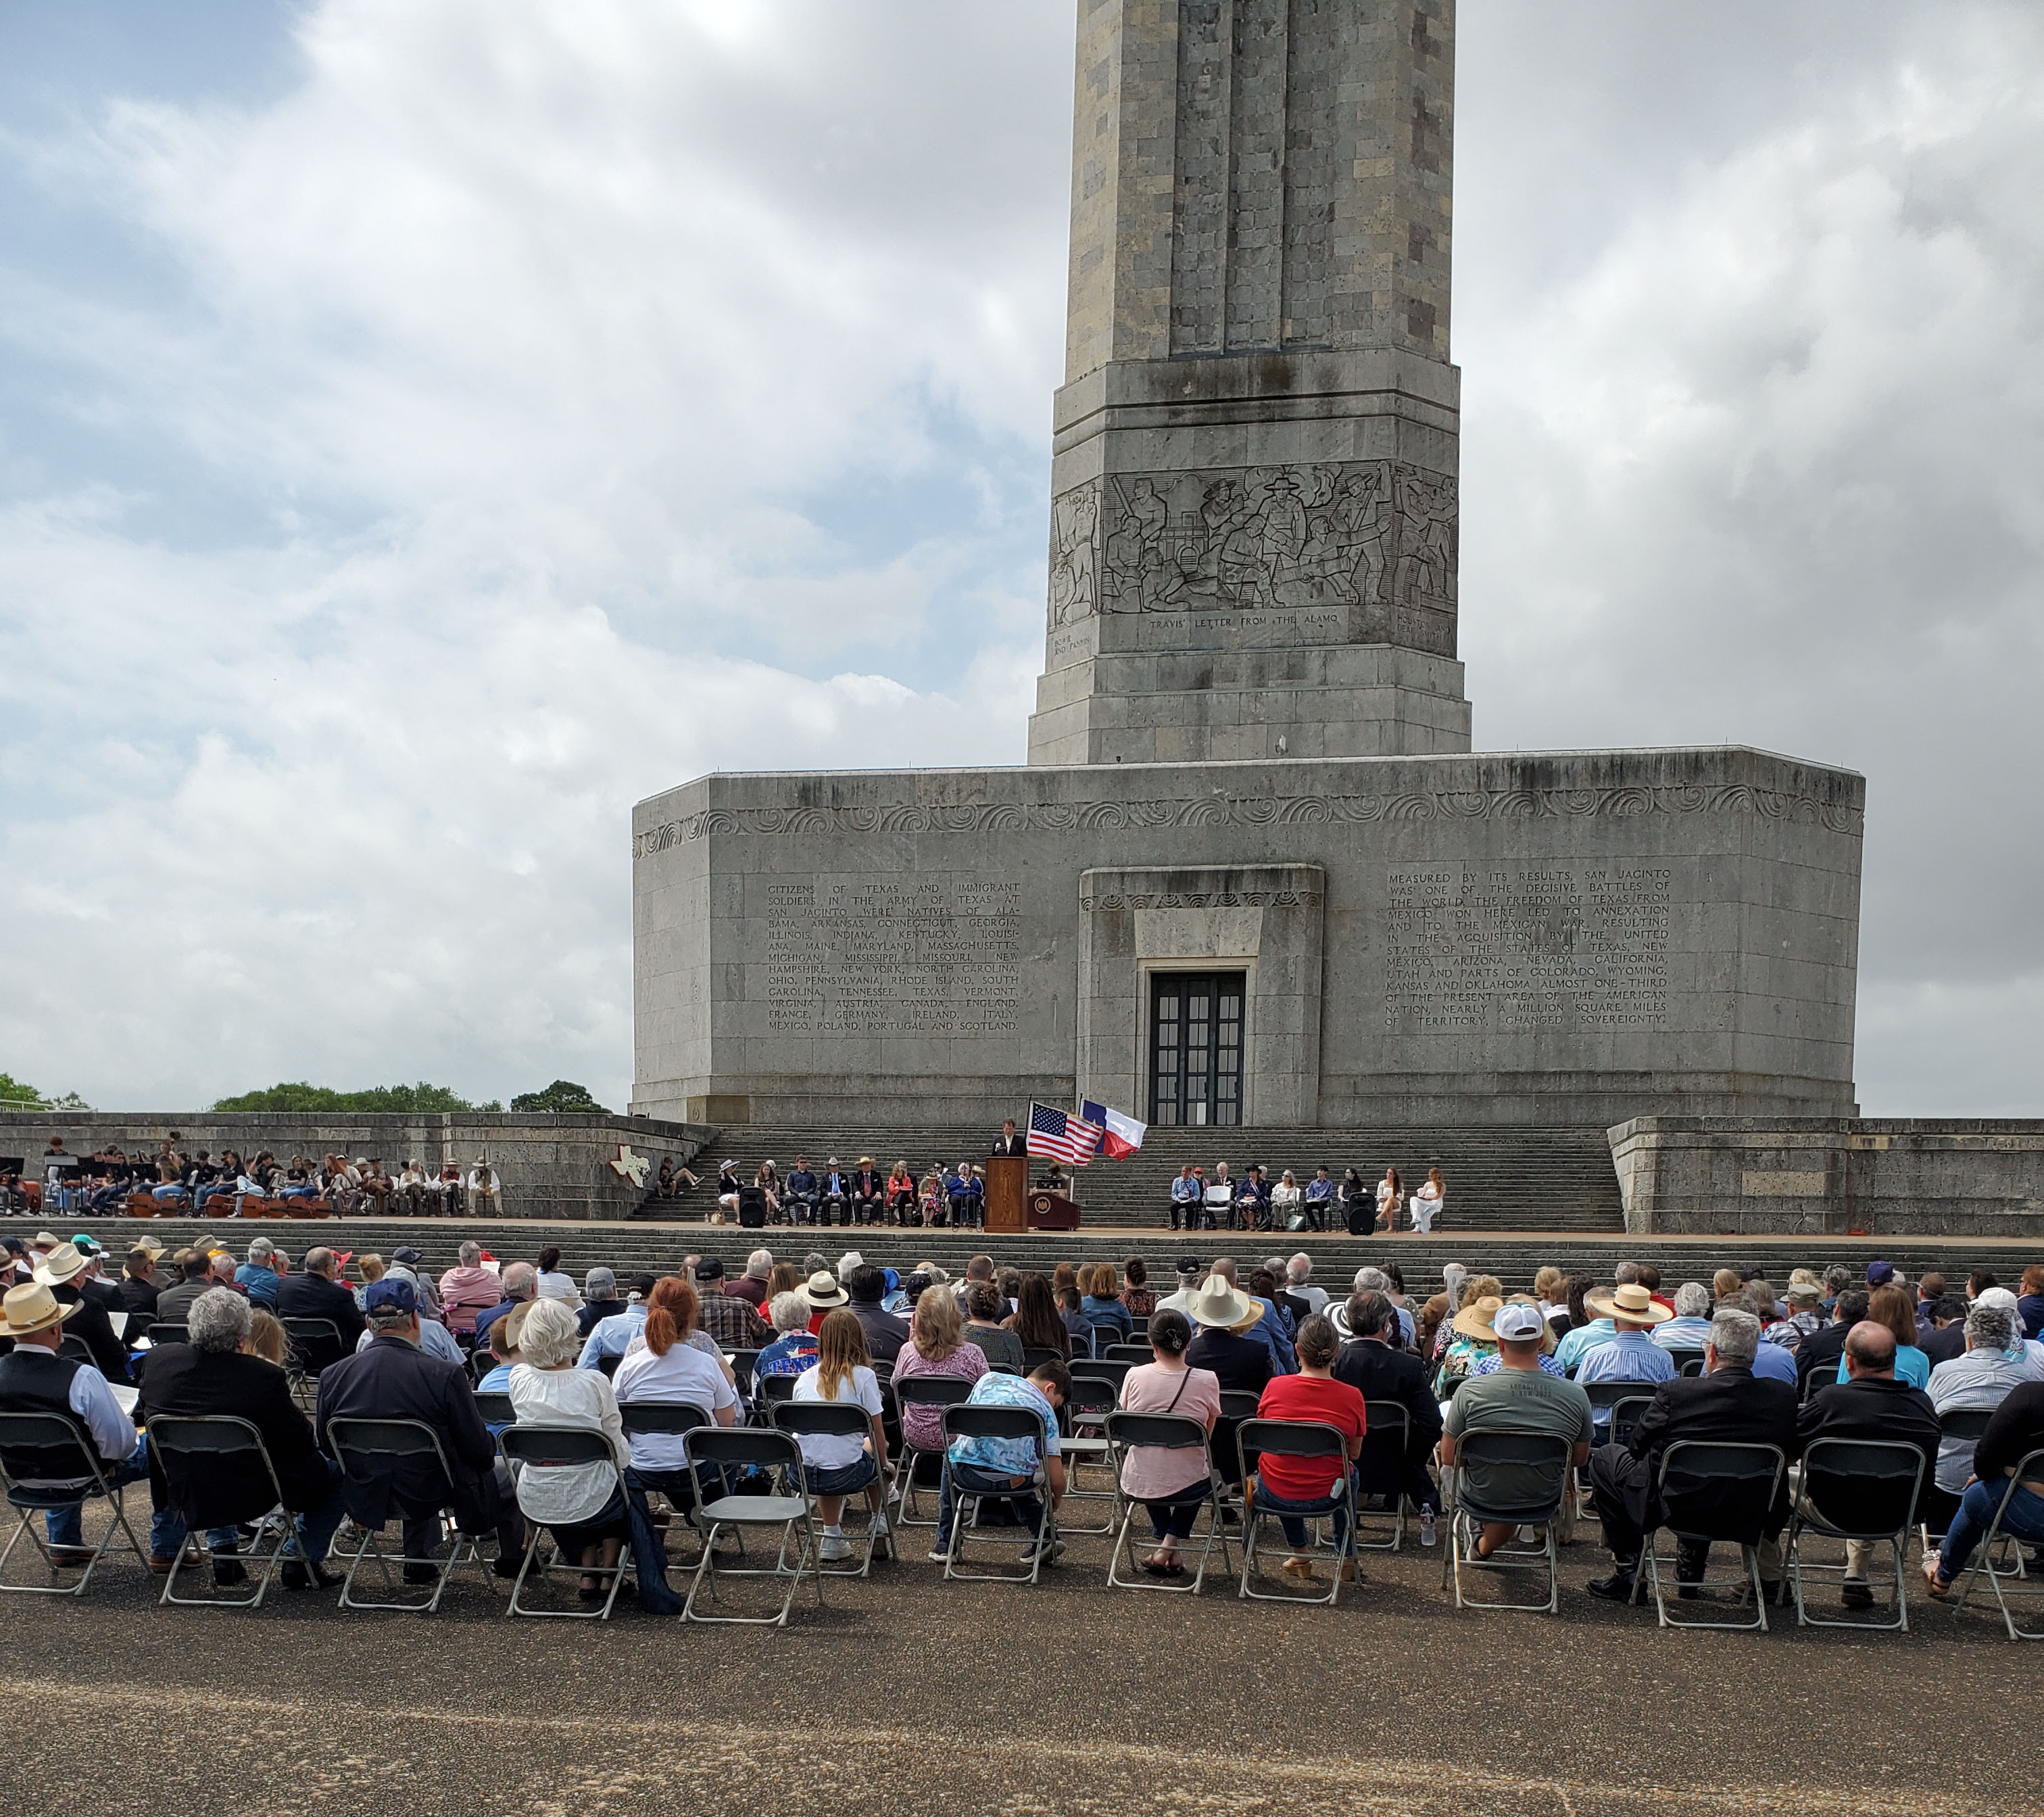 People sit in rows of chairs with their backs to the camera, facing a tall stone building and other people seated on a raised terrace, with Texas and U.S. flags flying.